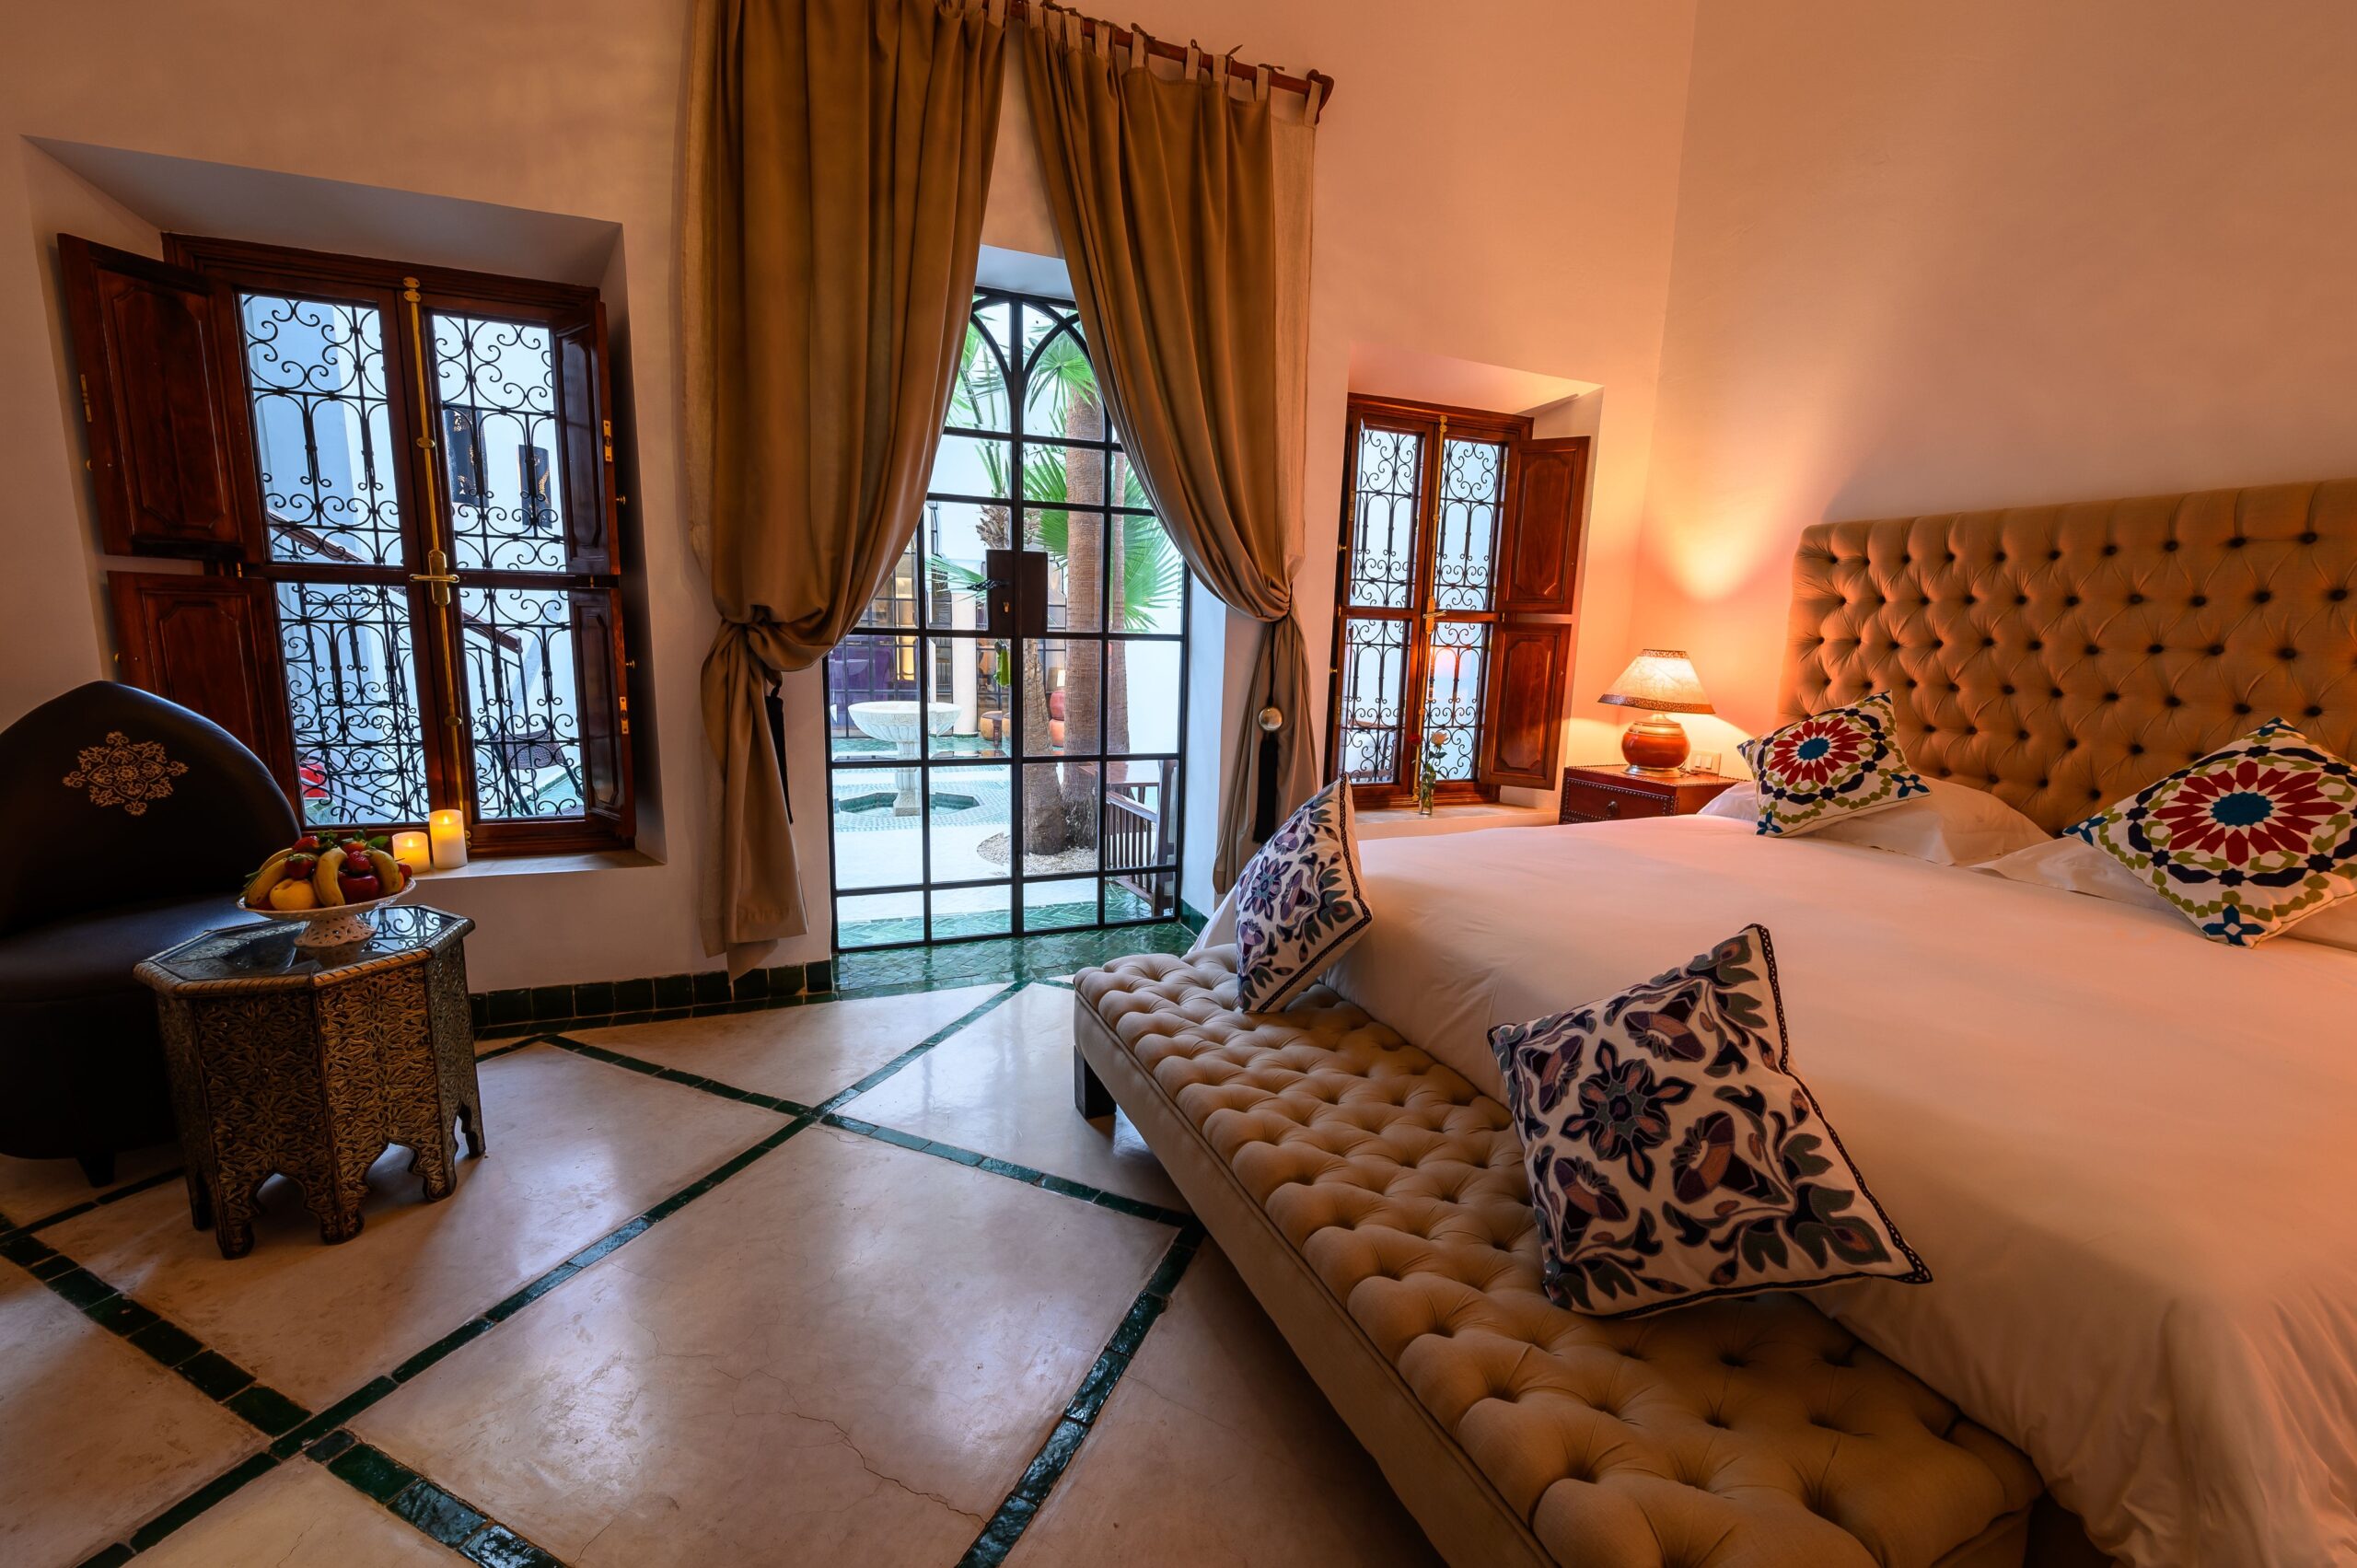 Amir Room - Rooms and Suites - Riad Luciano